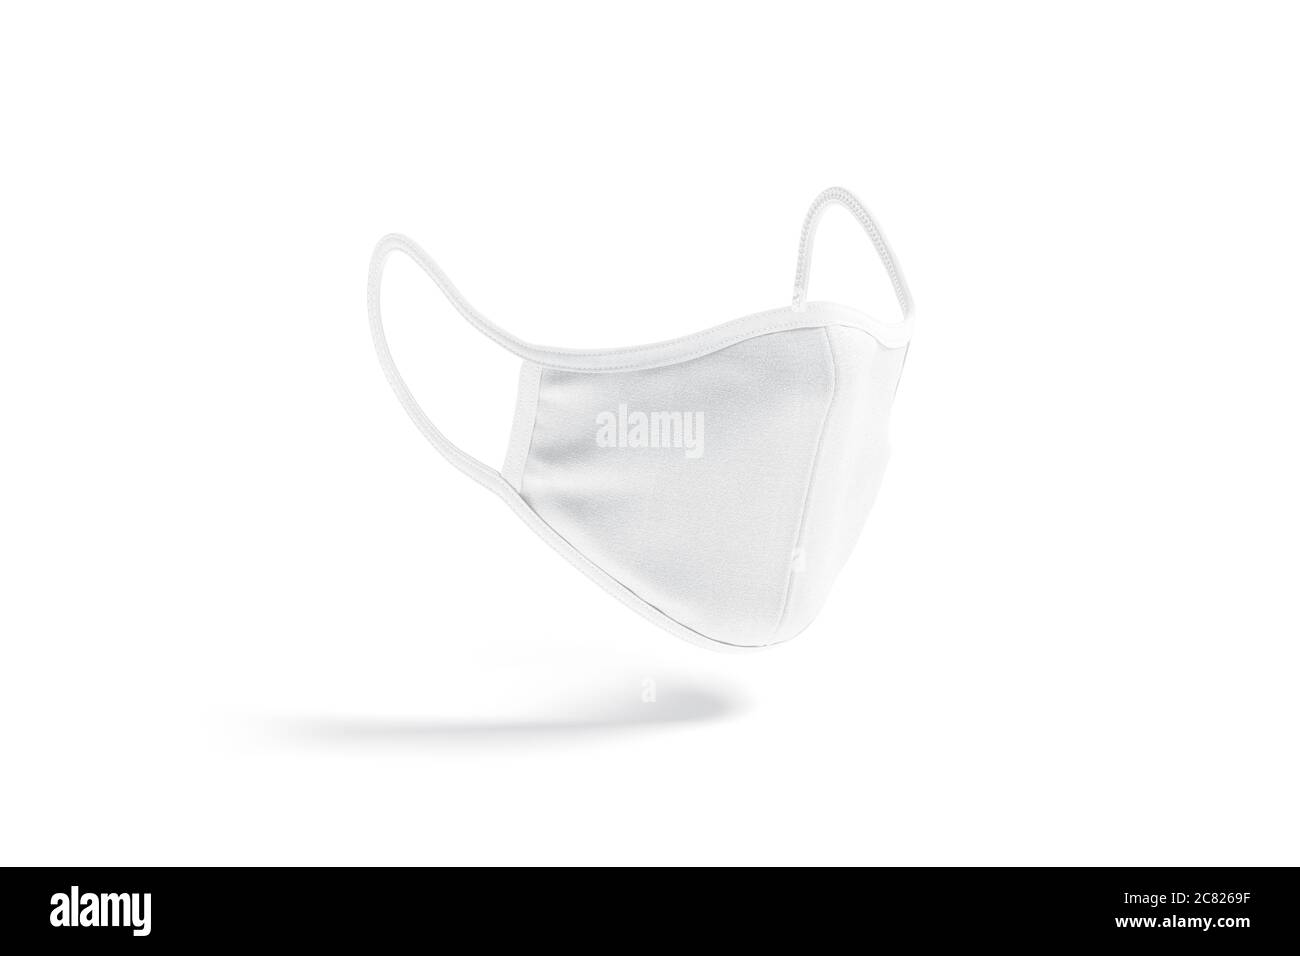 Download Blank White Fabric Face Mask Mockup Side View No Graity Stock Photo Alamy Yellowimages Mockups